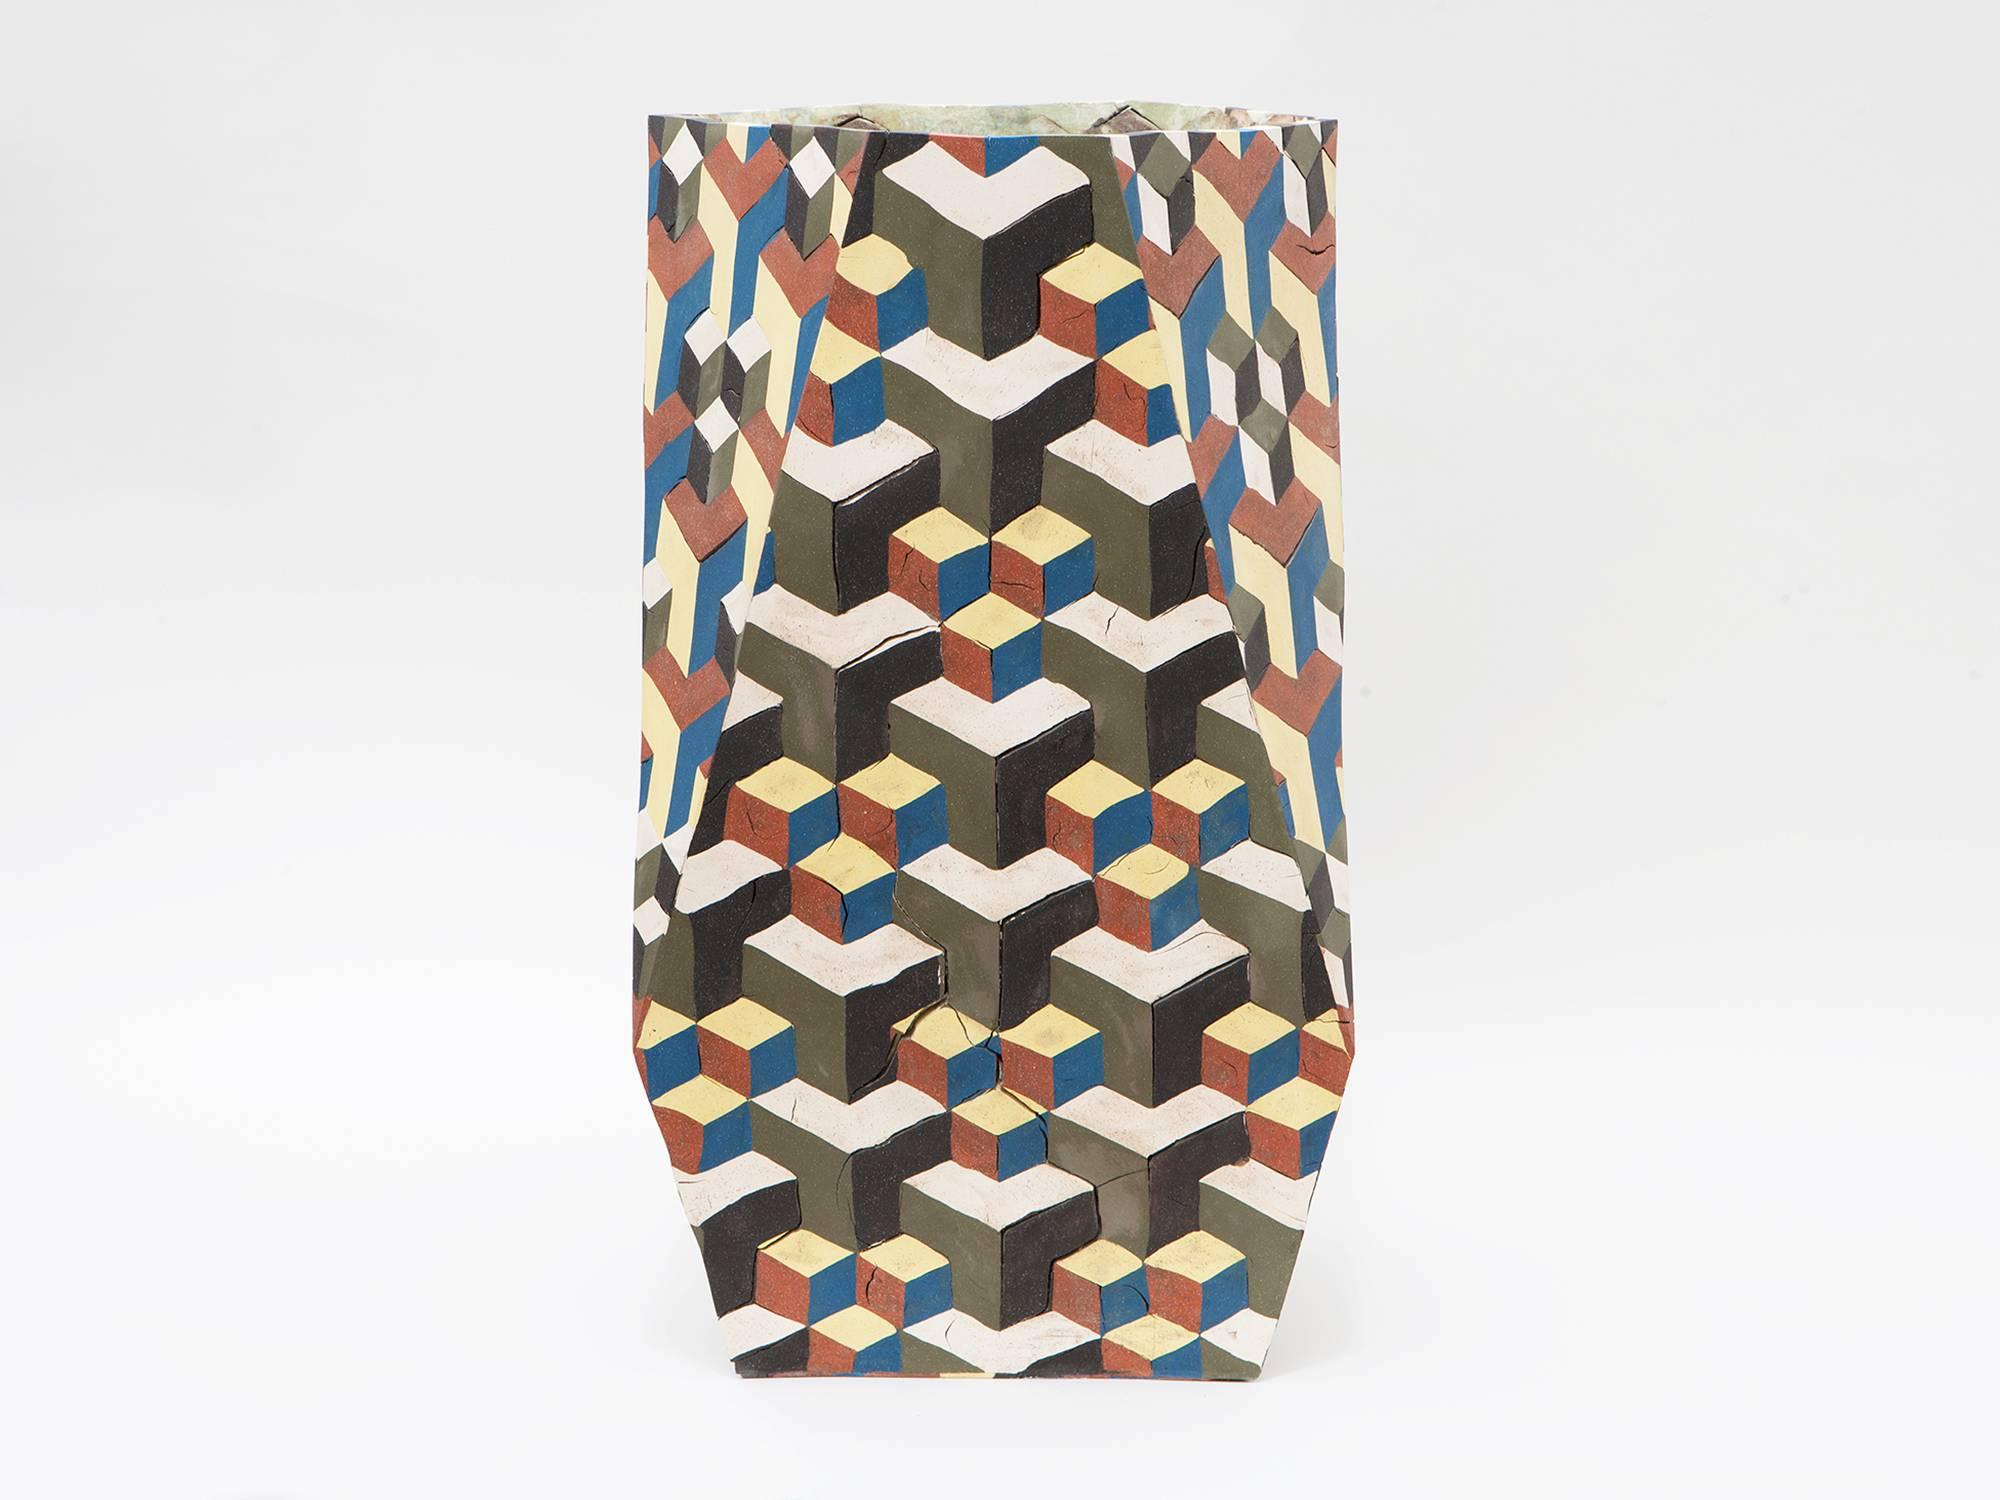 Stunning colorful hand-built, slab-constructed and inlaid ceramic vase by Brooklyn-based artist Cody Hoyt.

Cody Hoyt Truncated Tetrahedron.
USA, 2016.
Measures: 29 x 16.5 x 15.
$16,500.
  